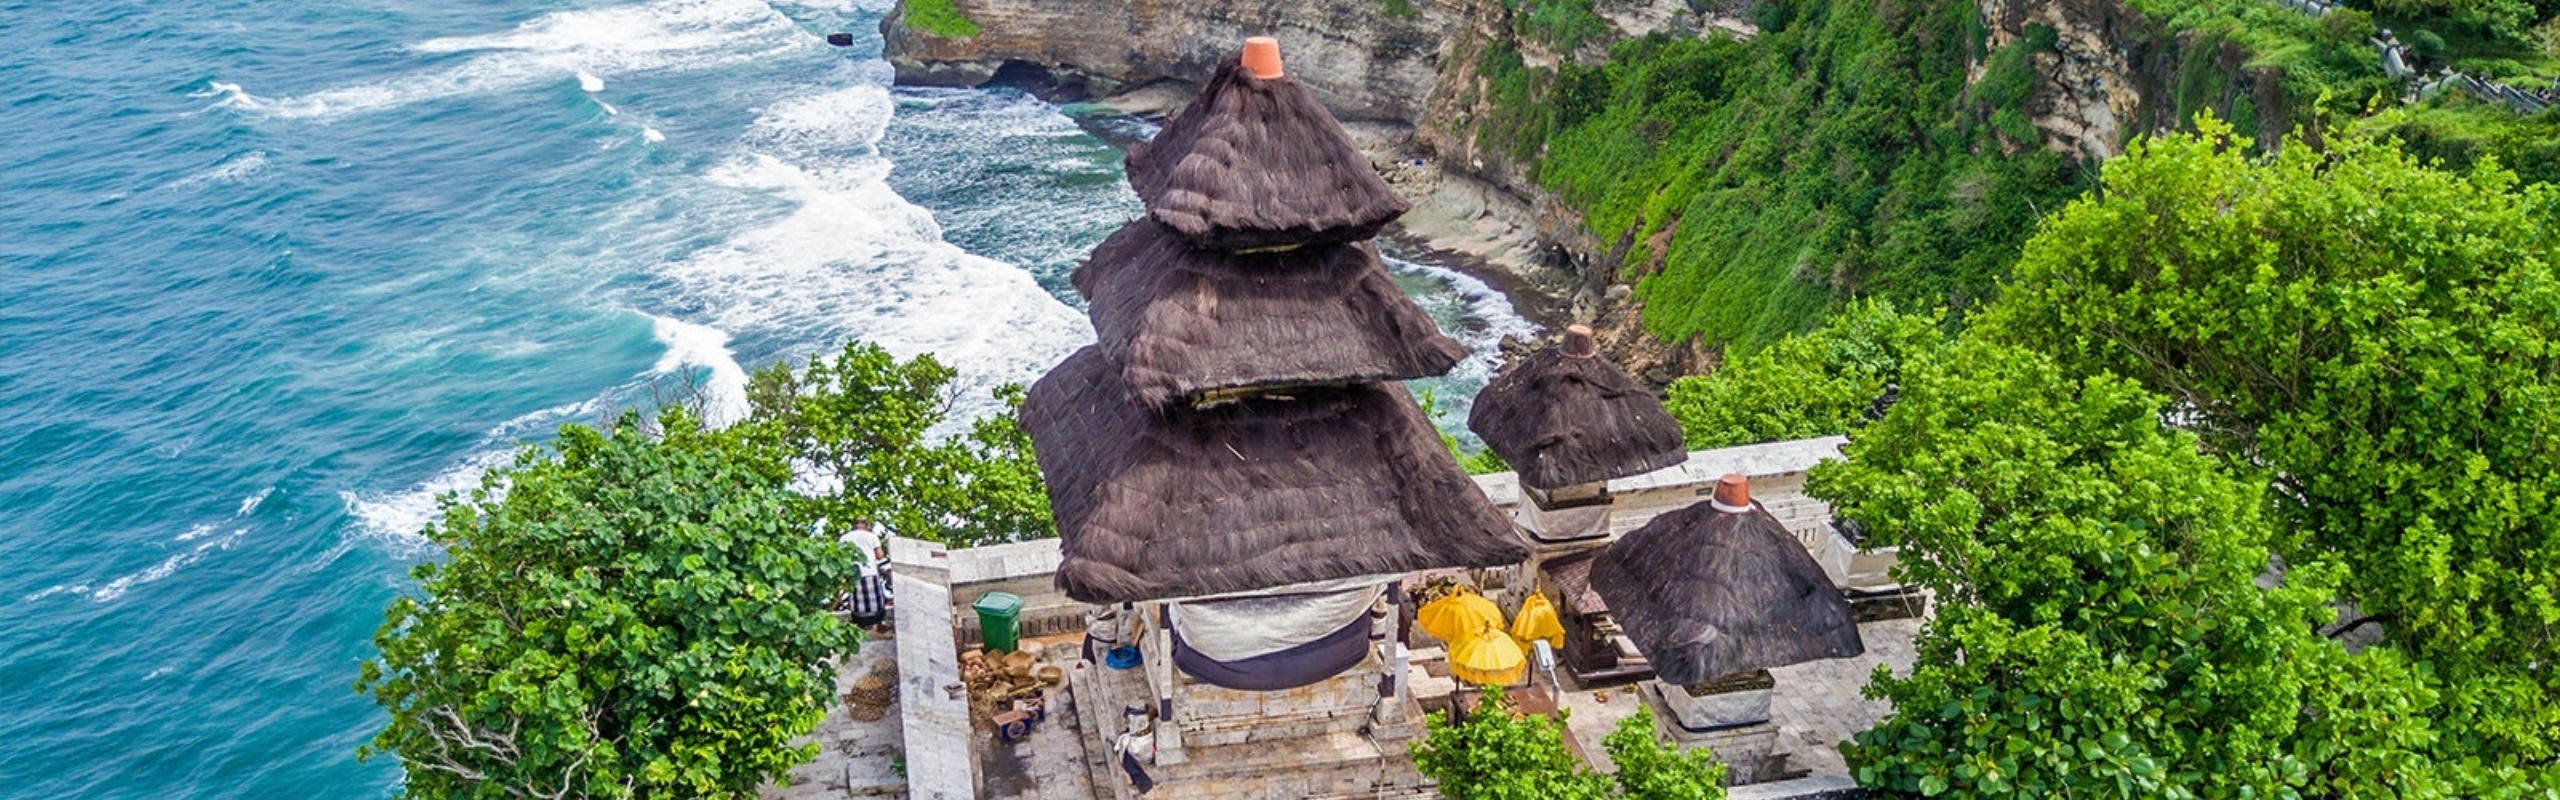 Best Beaches in Bali: How to Choose the Right One for Your Trip